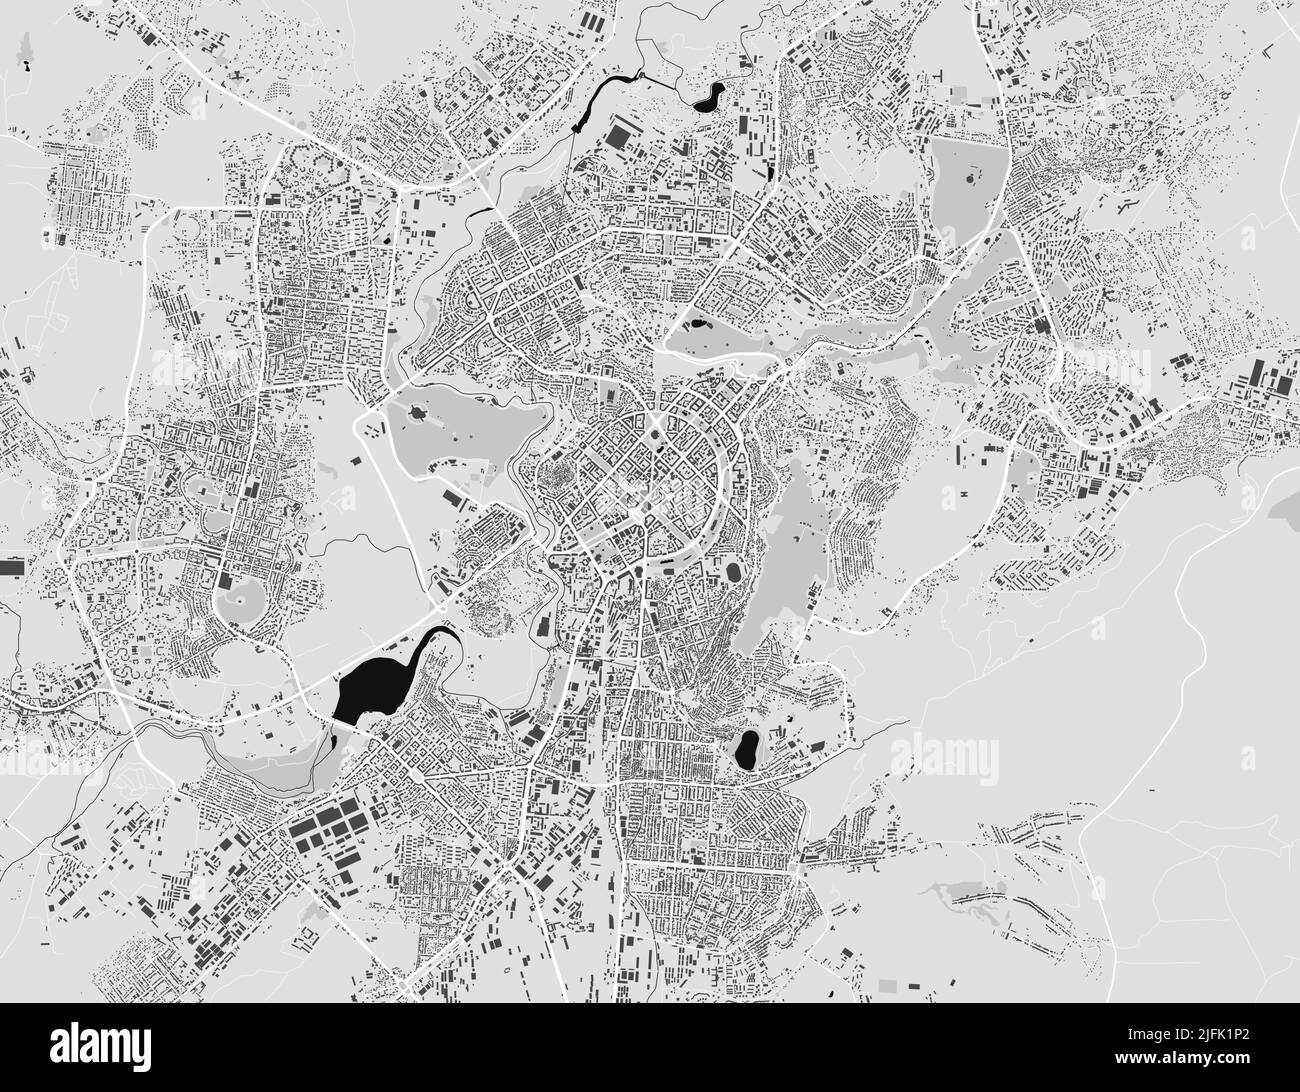 Urban city vector map of Yerevan. Vector illustration, Yerevan map grayscale black and white art poster. Street map image with roads, metropolitan cit Stock Vector